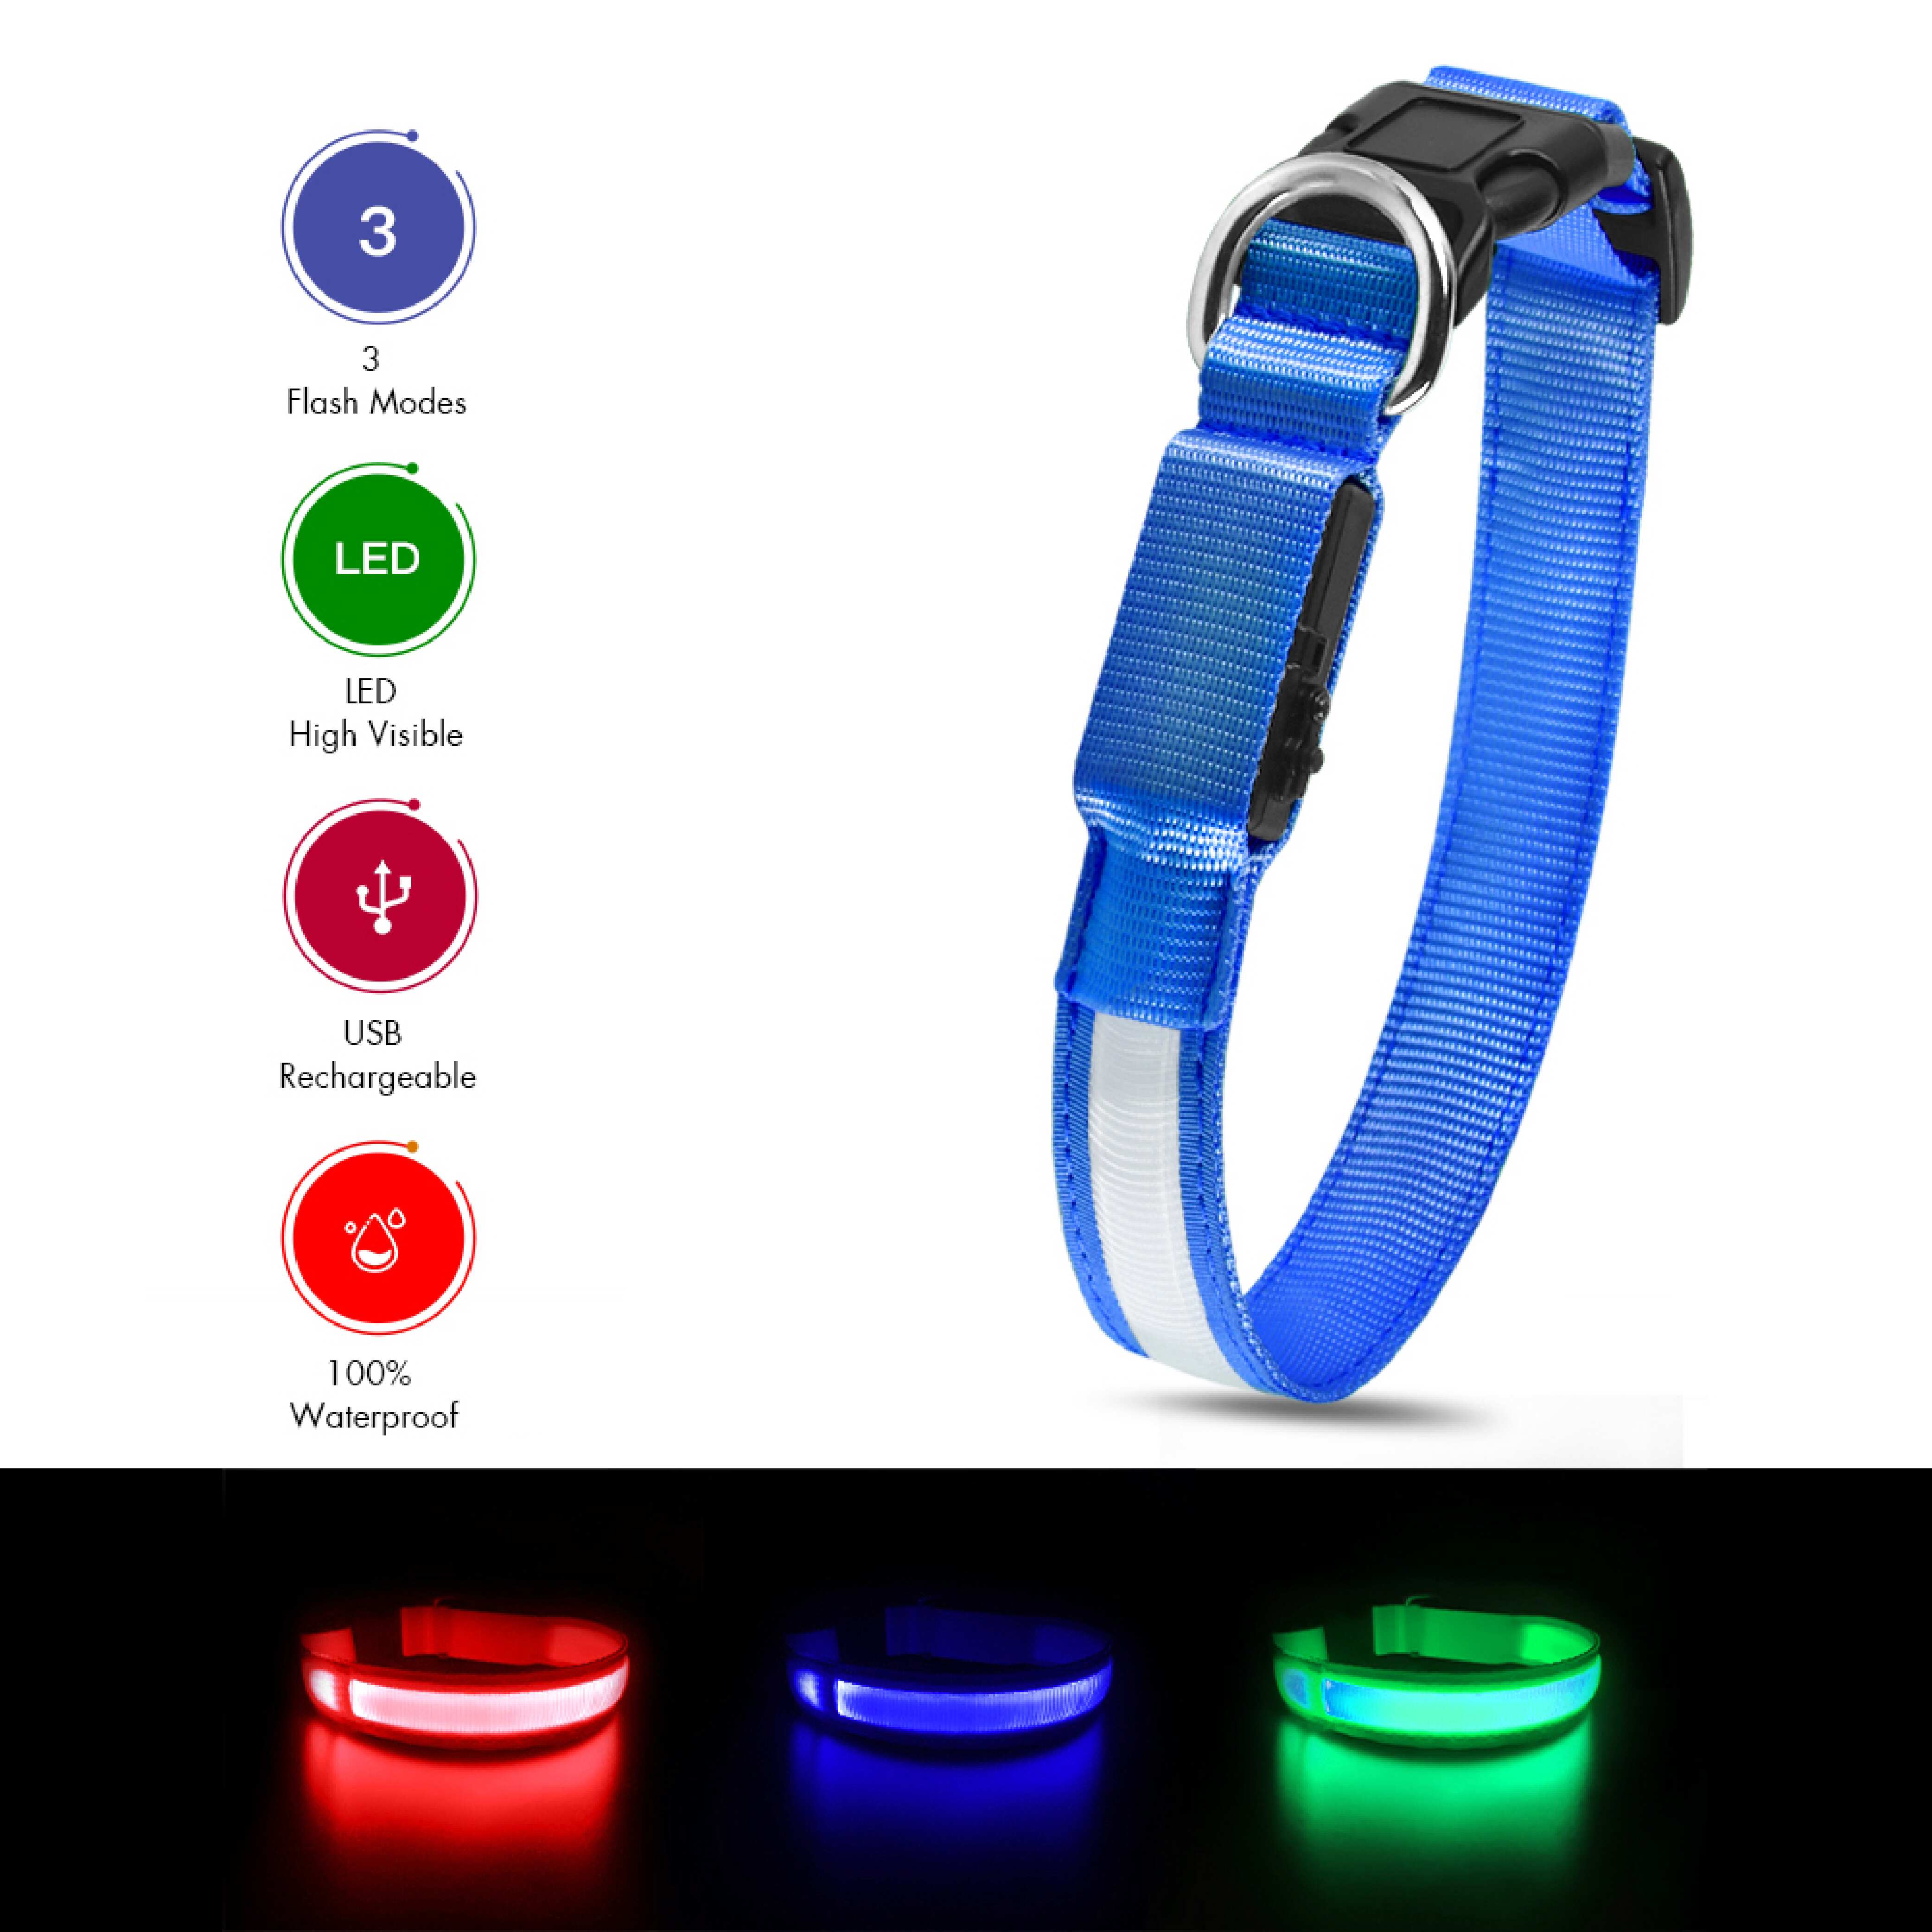 Striped LED Flashing Dog Collar, Traction Collar, Best Seller Pet Collar, High Quality Pet Accessory, USB Rechargeable.